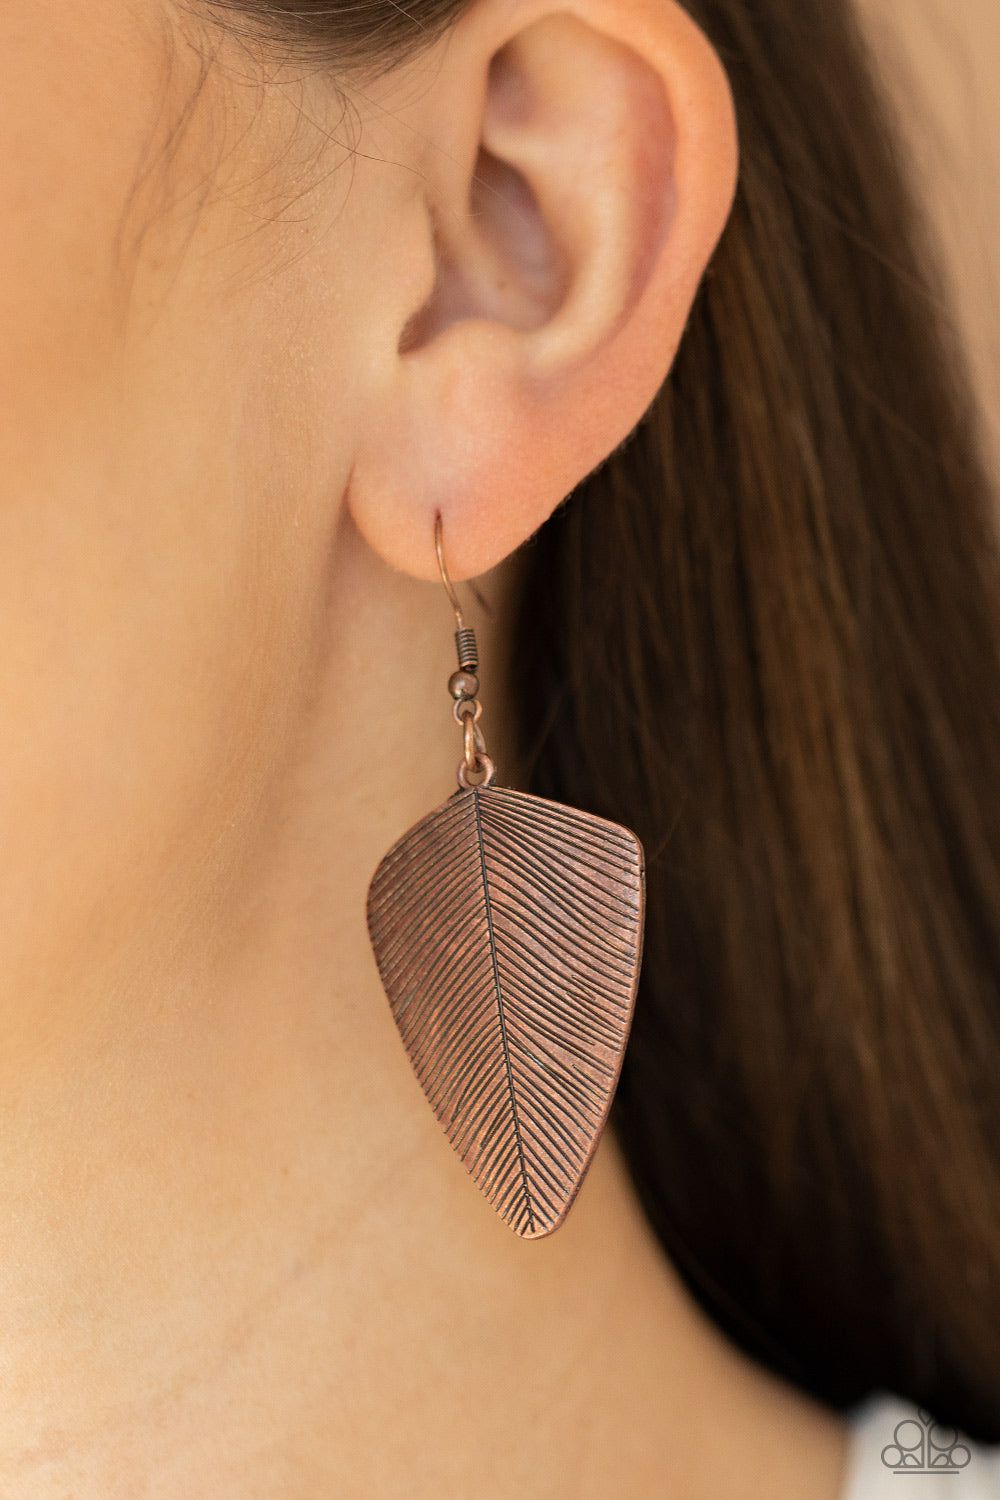 One Of The Flock - Copper Earrings - Princess Glam Shop